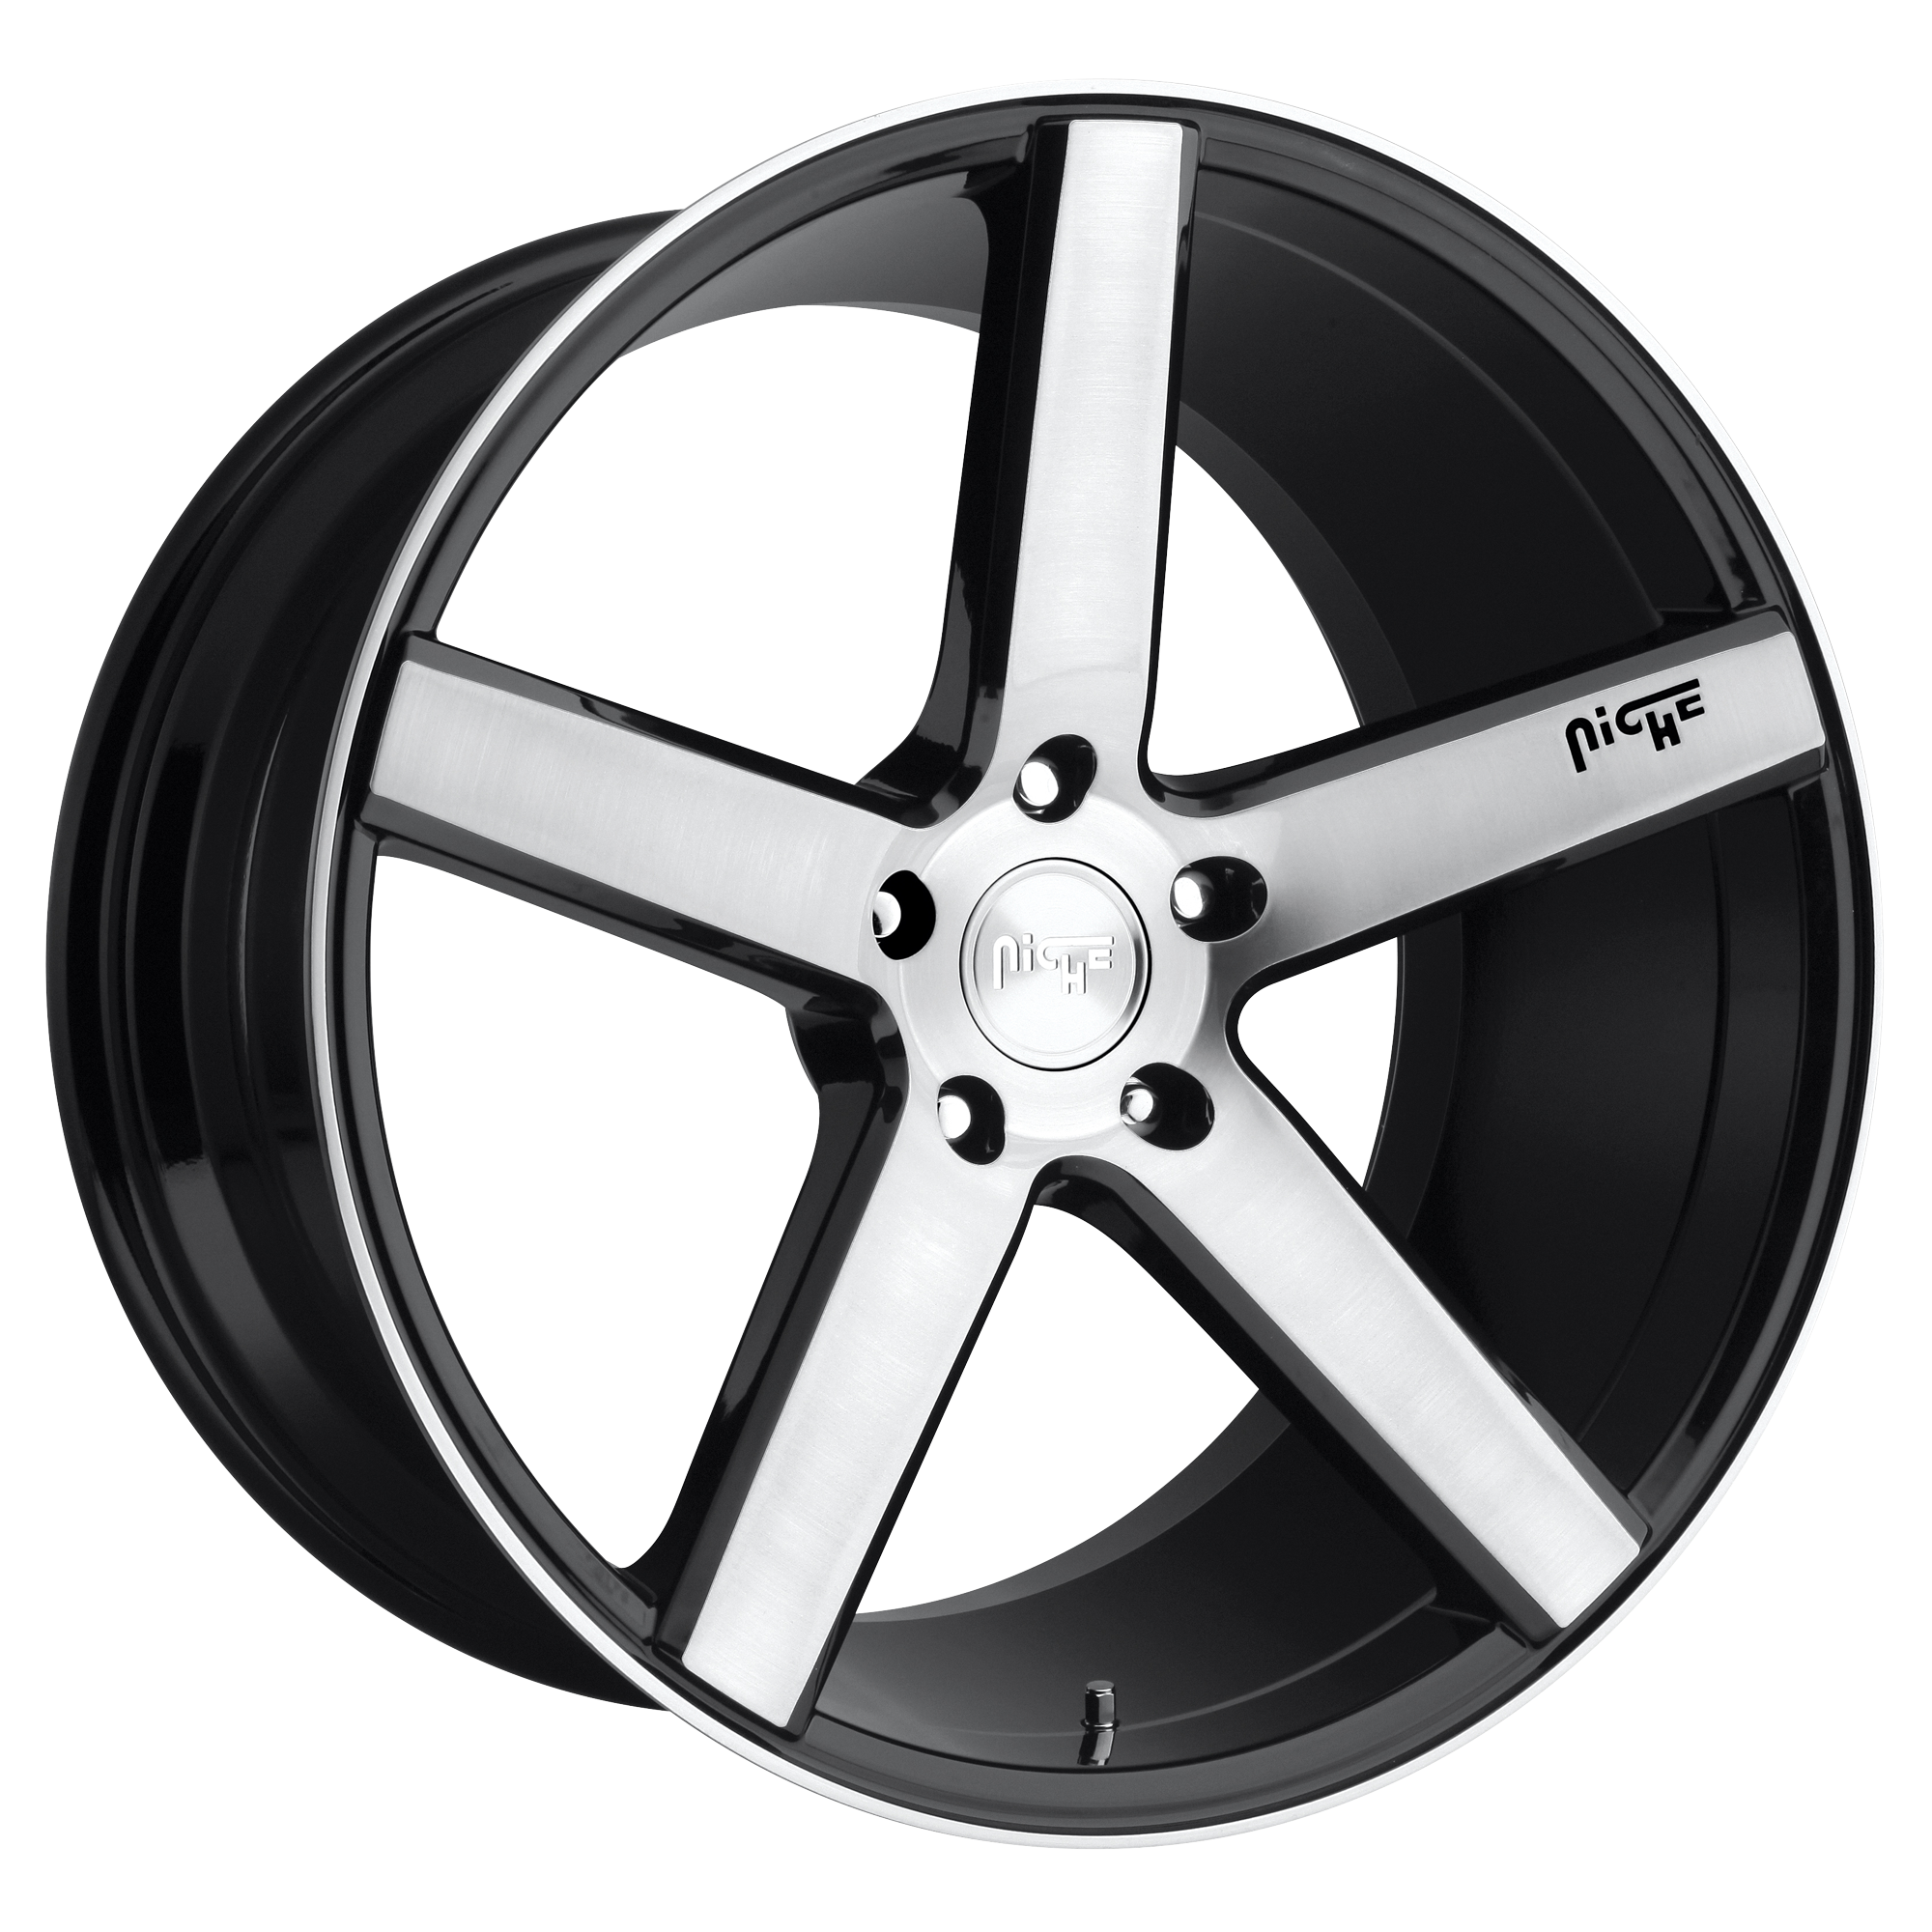 MILAN 20x8.5 5x120.00 GLOSS BLACK BRUSHED (35 mm) - Tires and Engine Performance